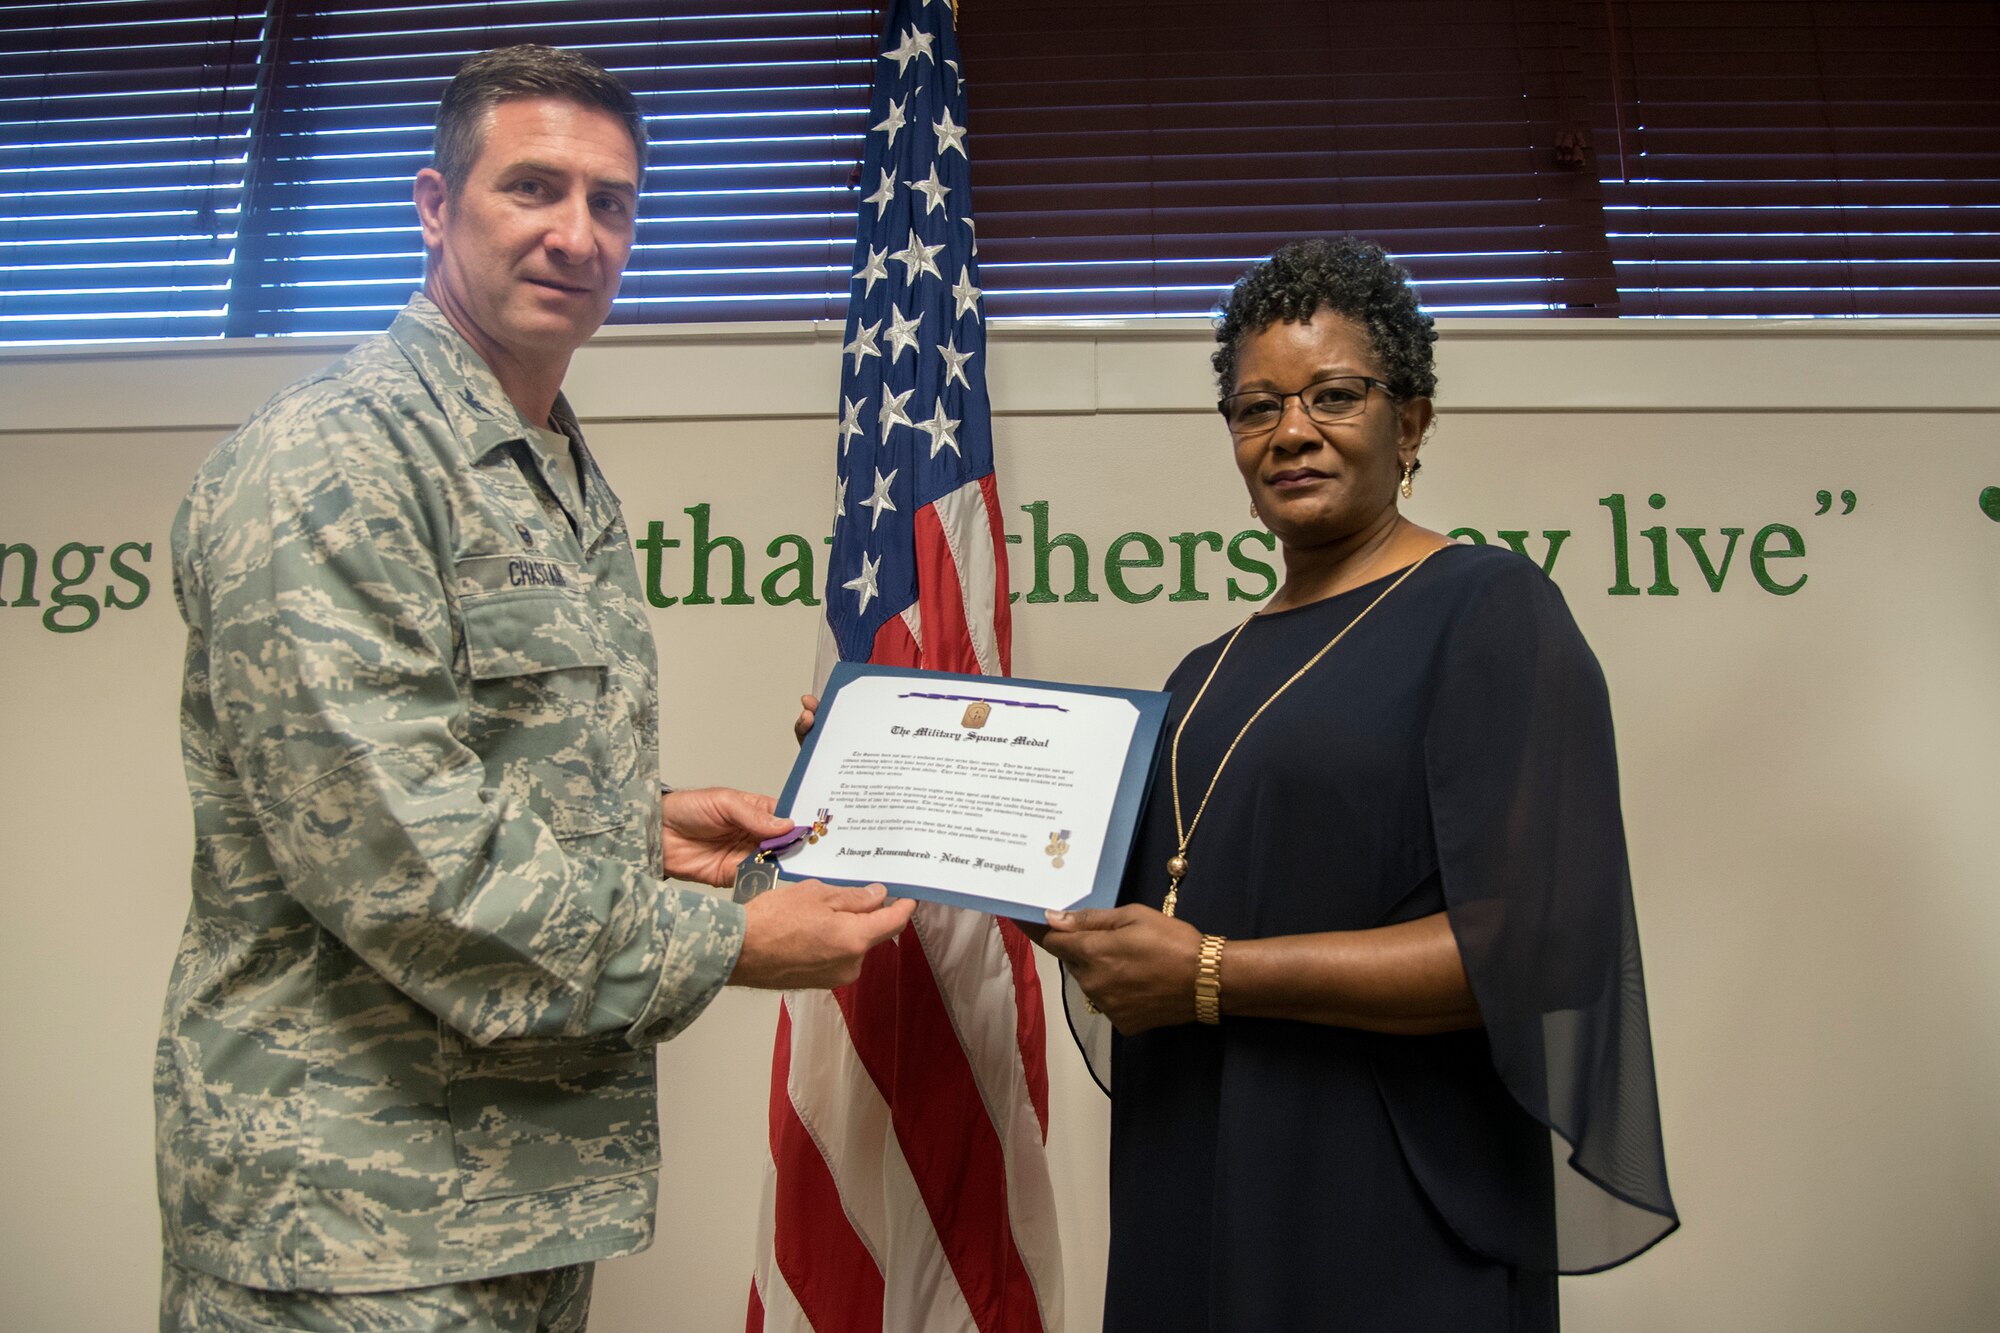 Col. John Chastain, left, 23d Maintenance Group (MXG) commander, and Cynthia Nelson, spouse of Arlonzo Nelson, 23d Maintenance Group computer assistant, pose for a photo, during a retirement ceremony, March 29, 2018, at Moody Air Force Base, Ga. Nelson is retiring after 30 years of civilian service here. (U.S. Air Force photo by Airman Eugene Oliver)